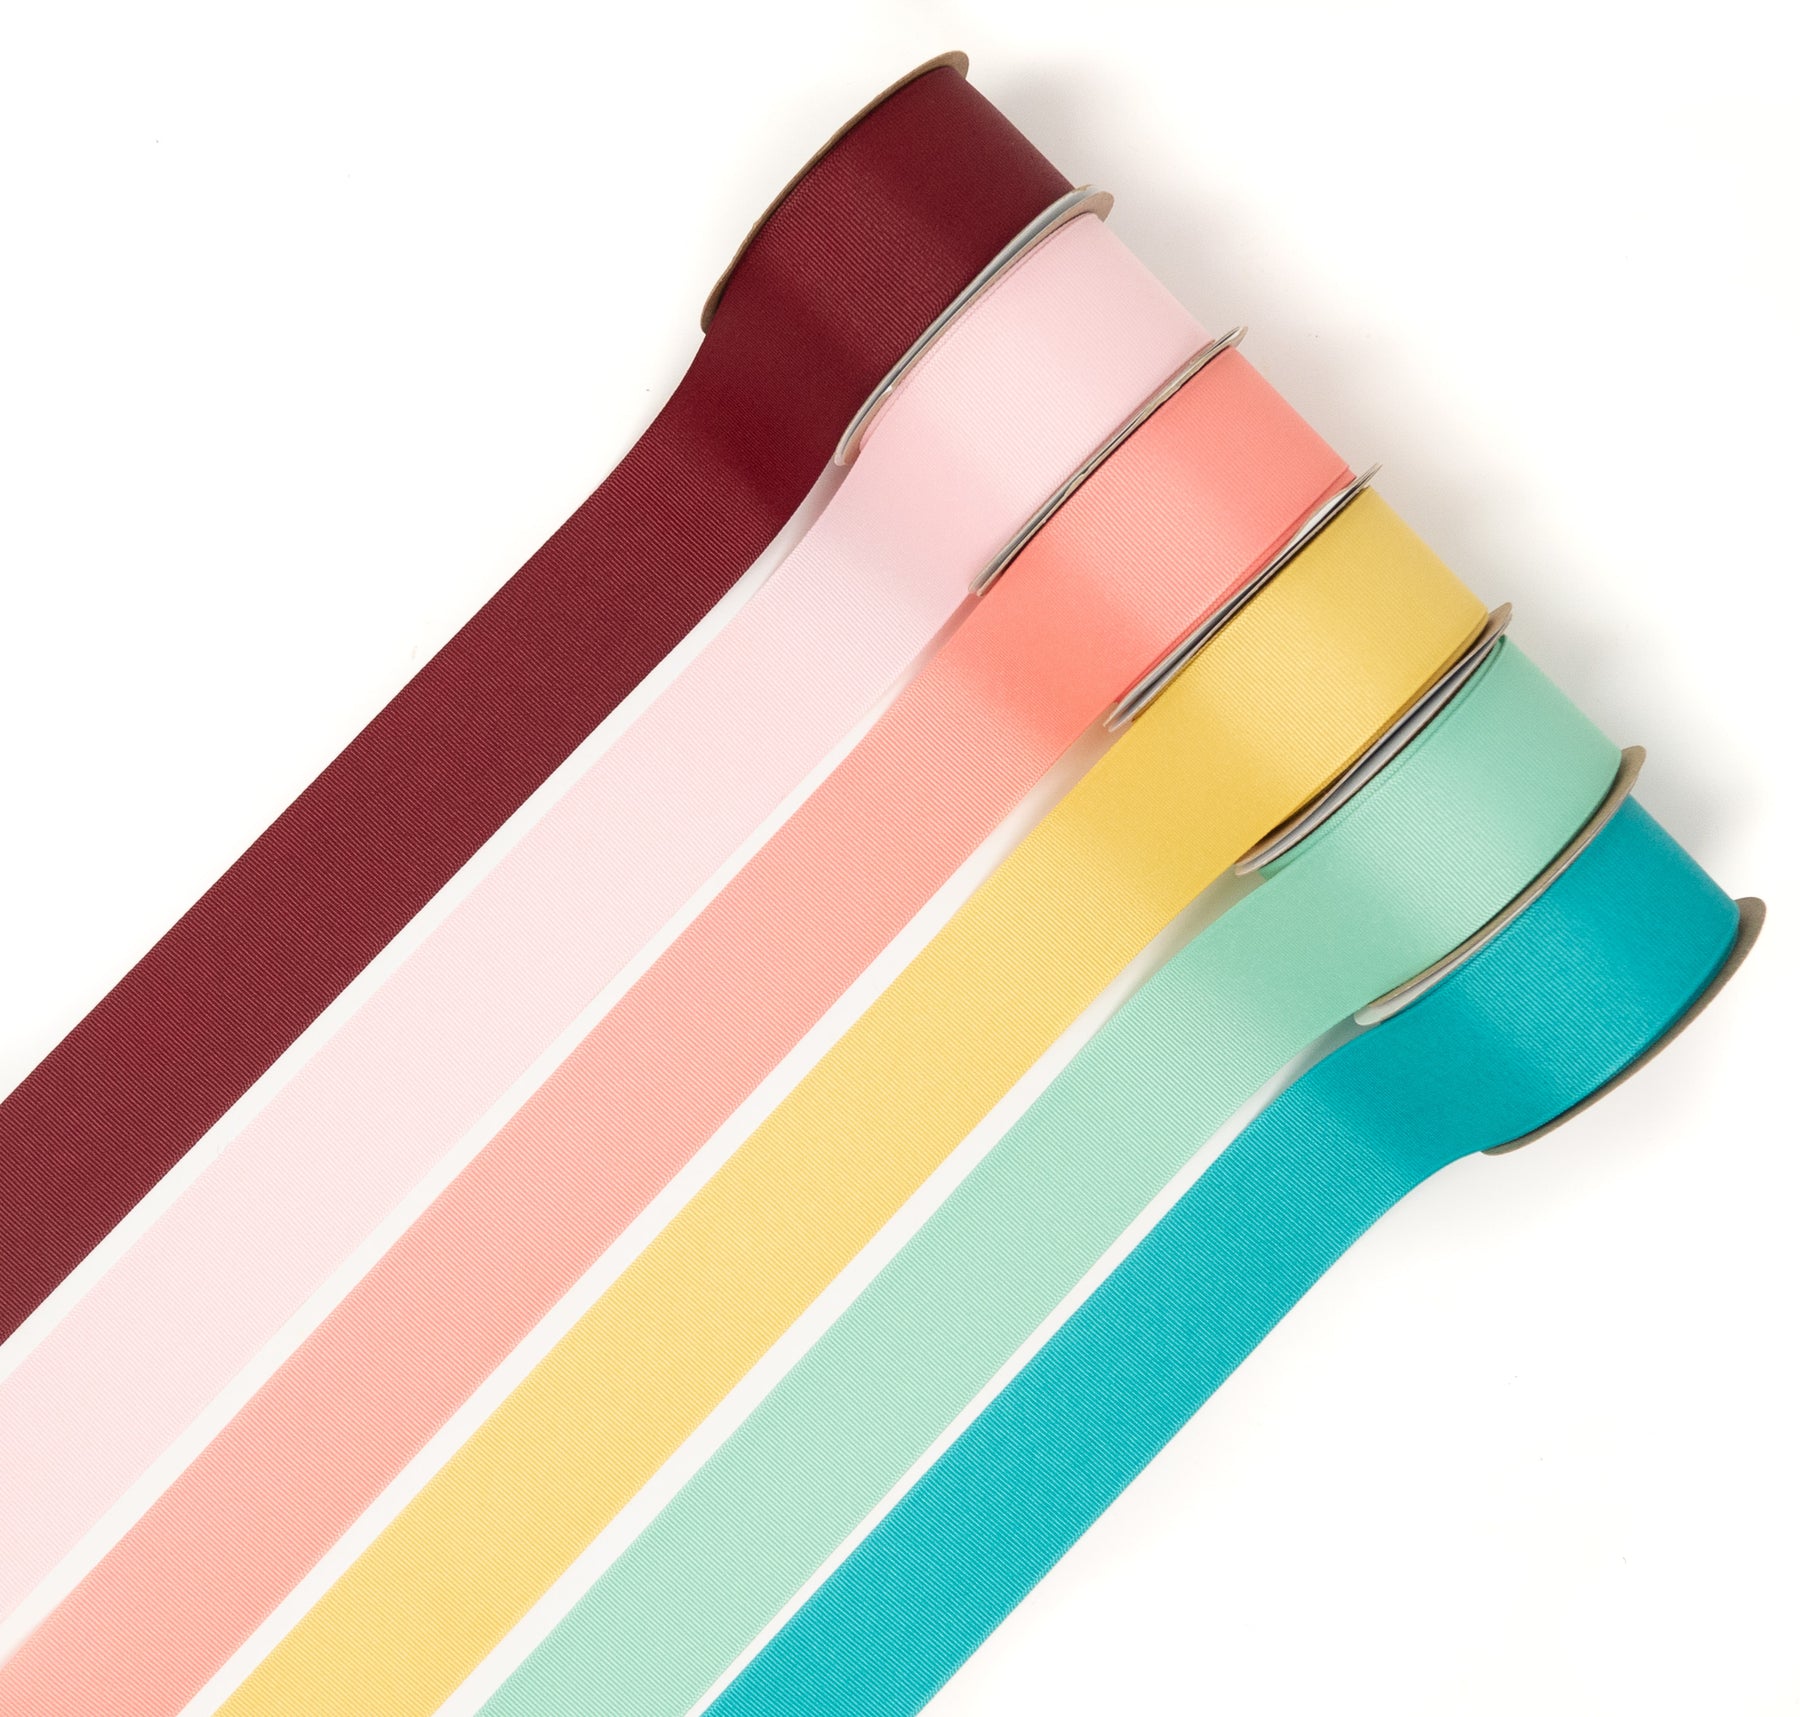 100% Polyester, Solid Grosgrain ribbon at its finest. American made for the highest quality grosgrain ribbon available. This ribbon is available in 120 colors and 7 widths, making it the most versatile offering in grosgrain.